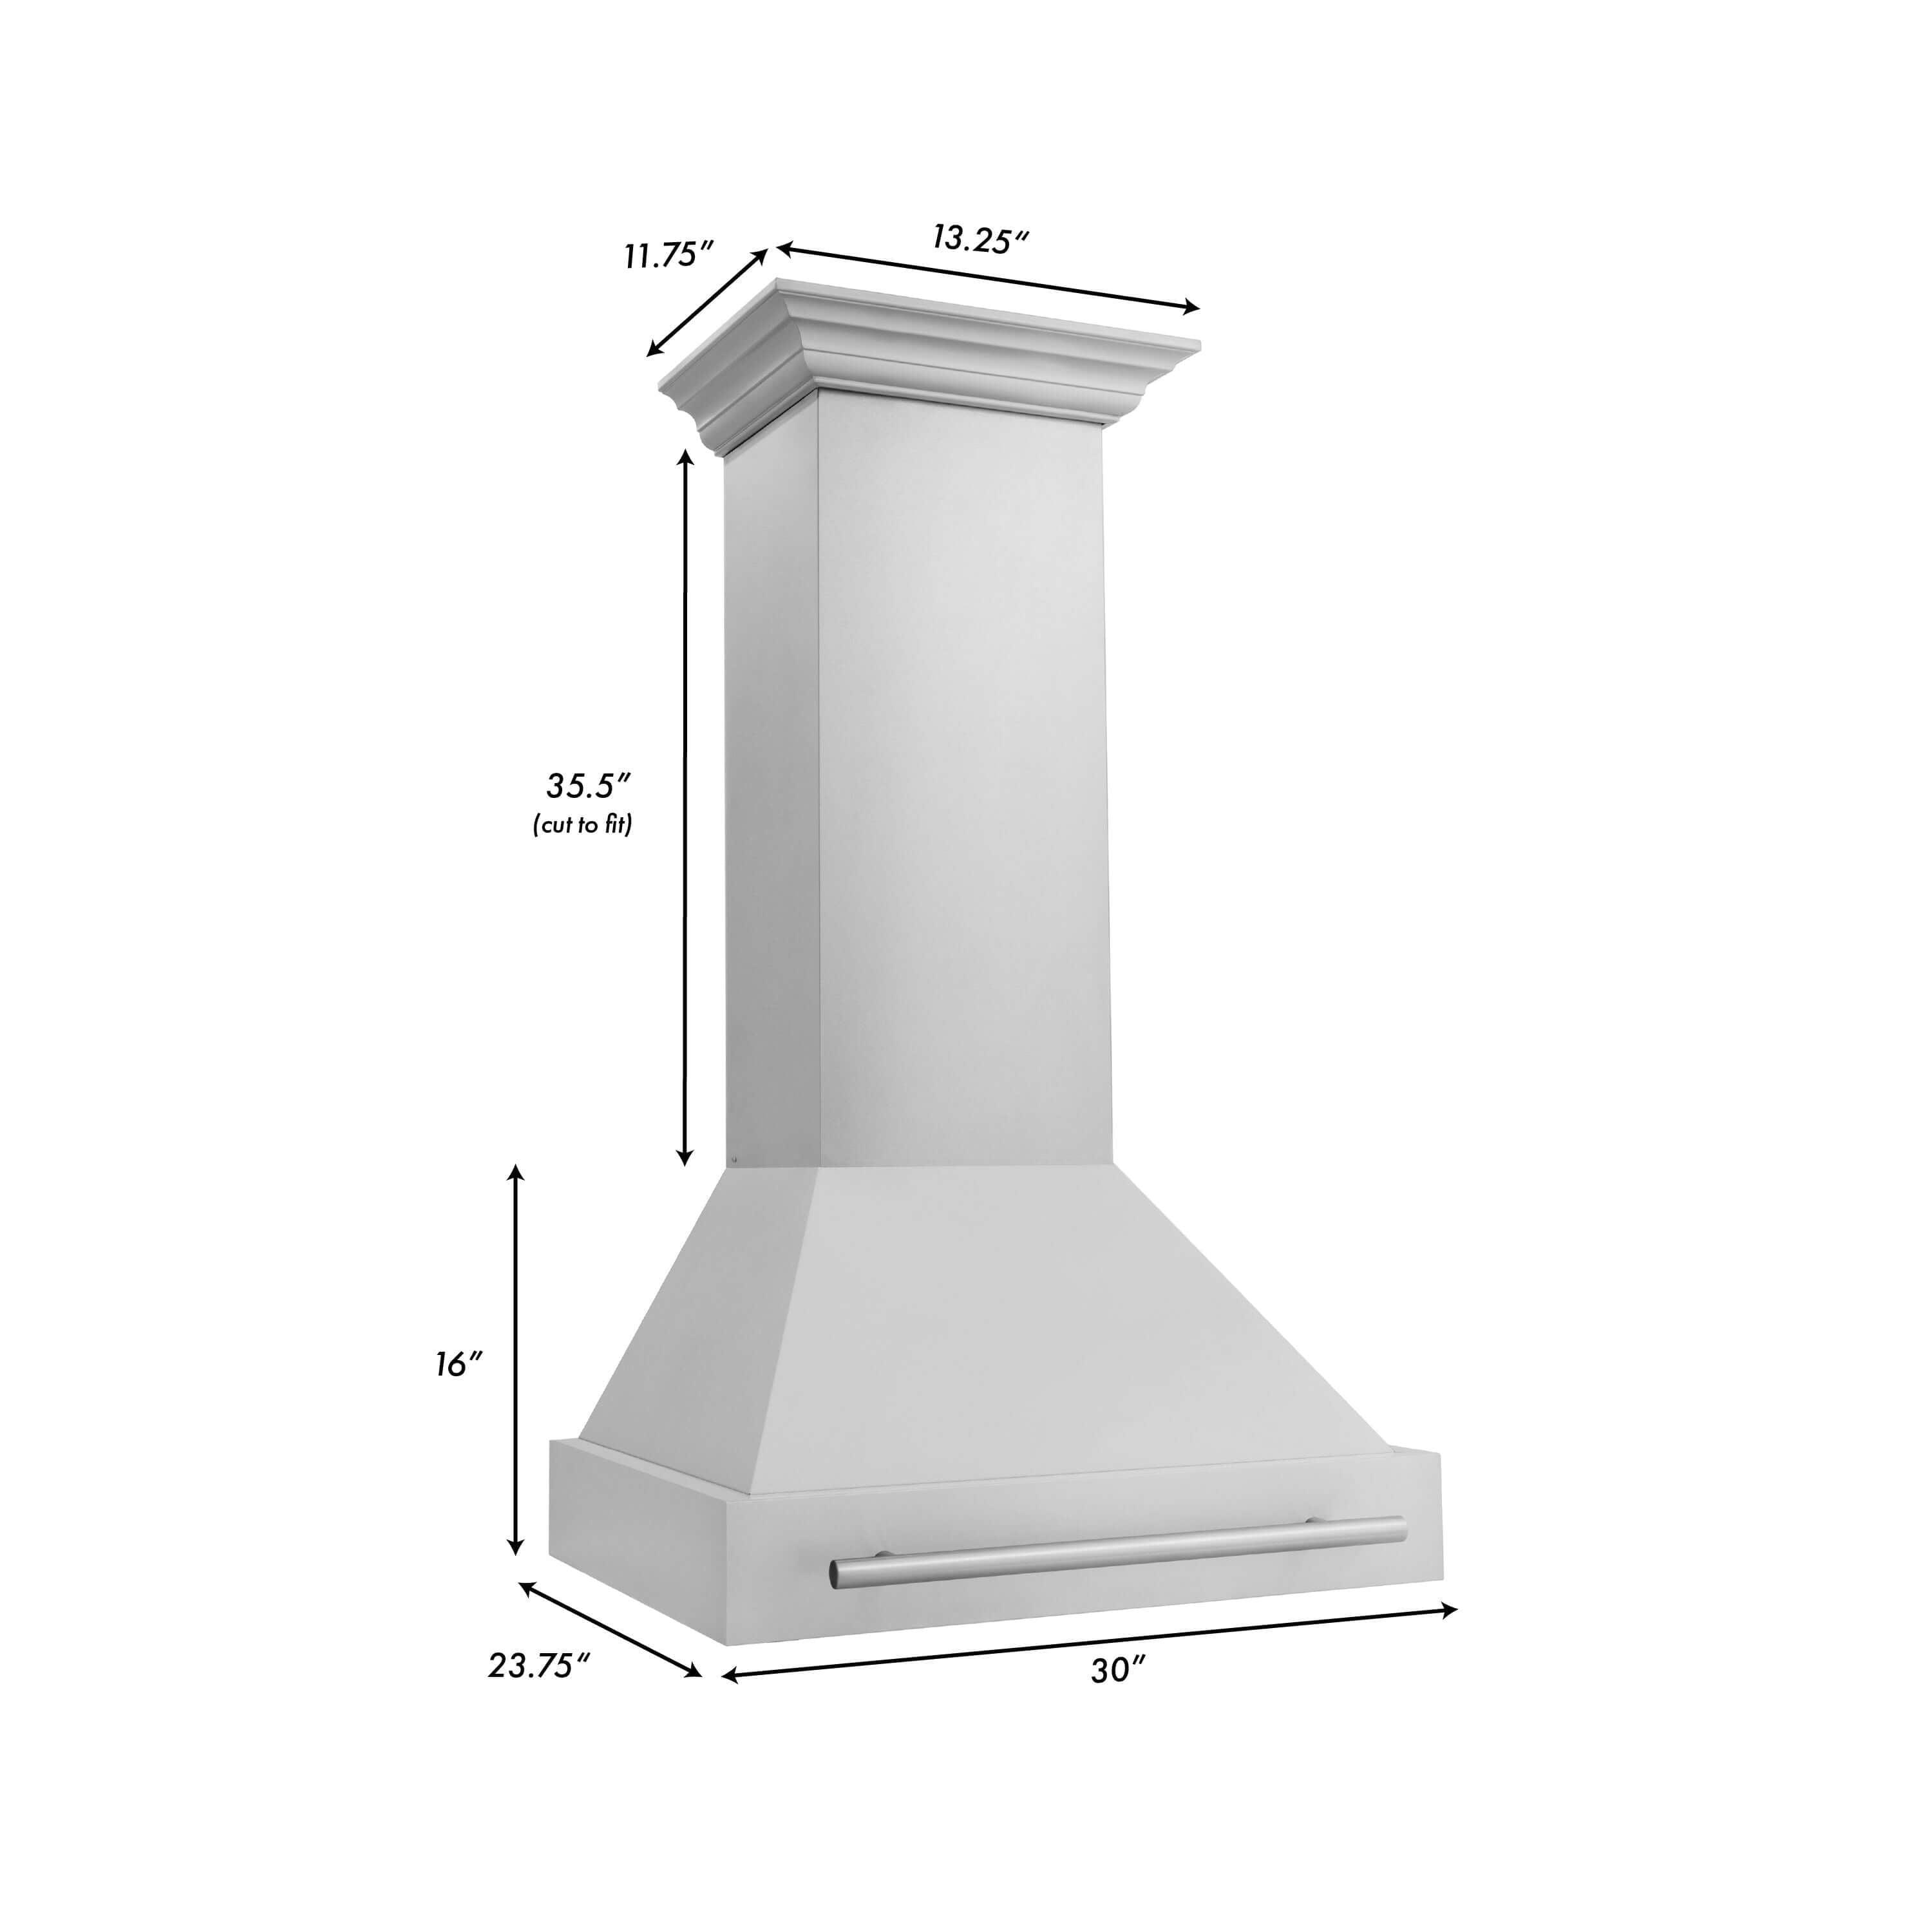 ZLINE 30 in. Stainless Steel Range Hood with Colored Shell Options and Stainless Steel Handle (8654STX-30) dimensional diagram and measurements.